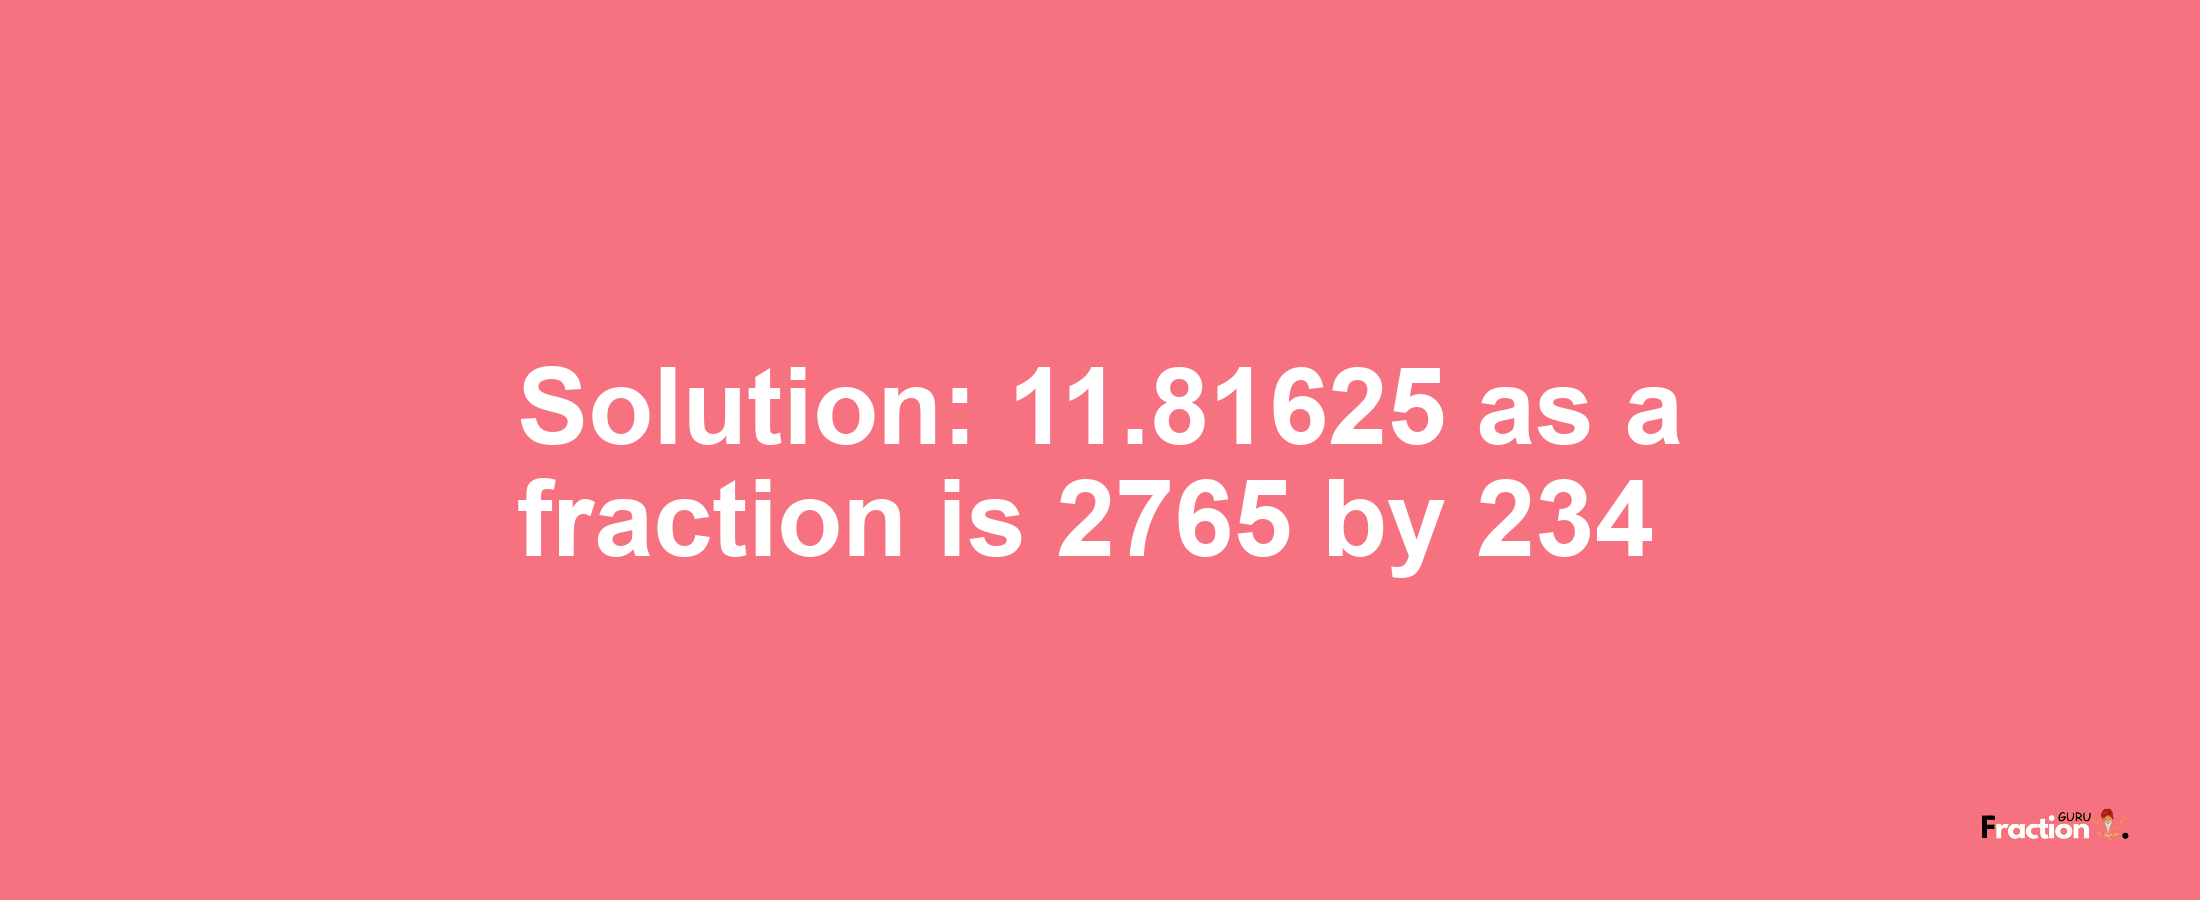 Solution:11.81625 as a fraction is 2765/234